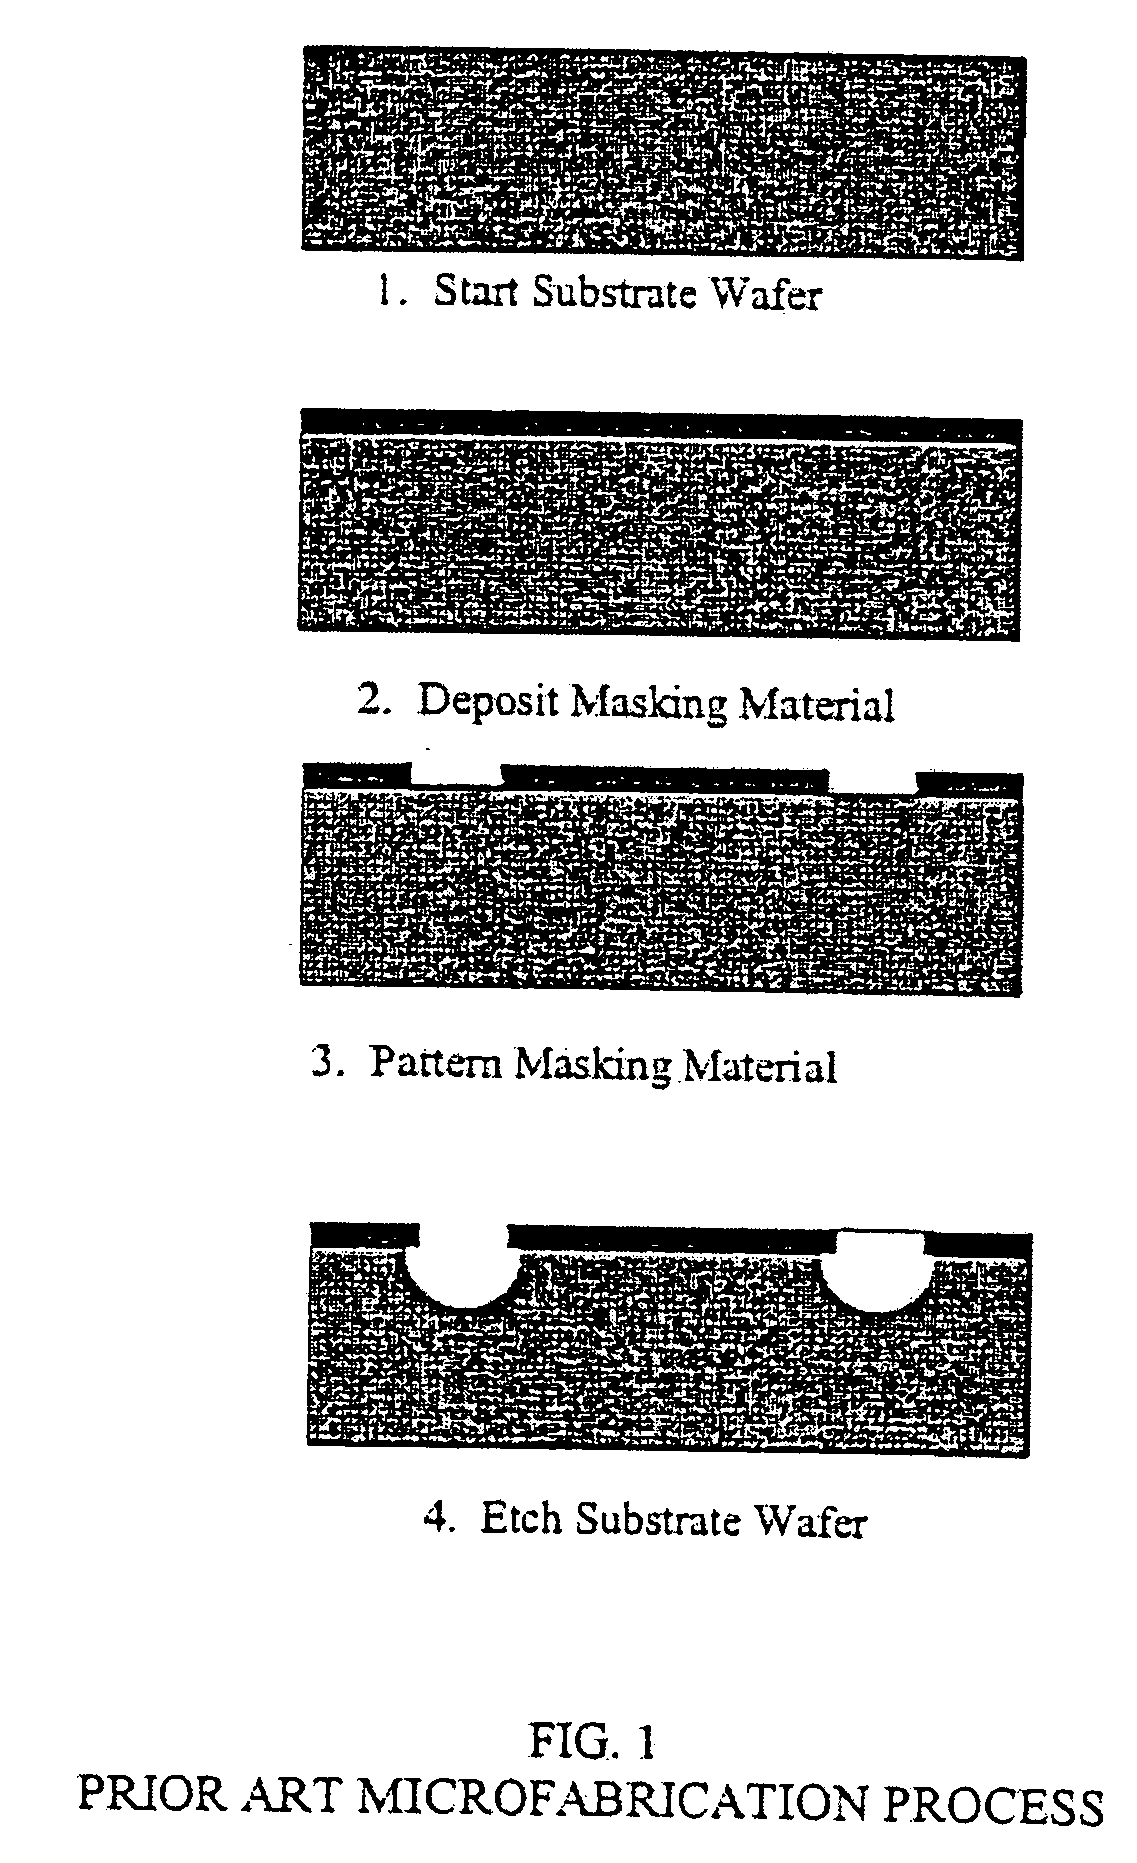 Method for microfabricating structures using silicon-on-insulator material